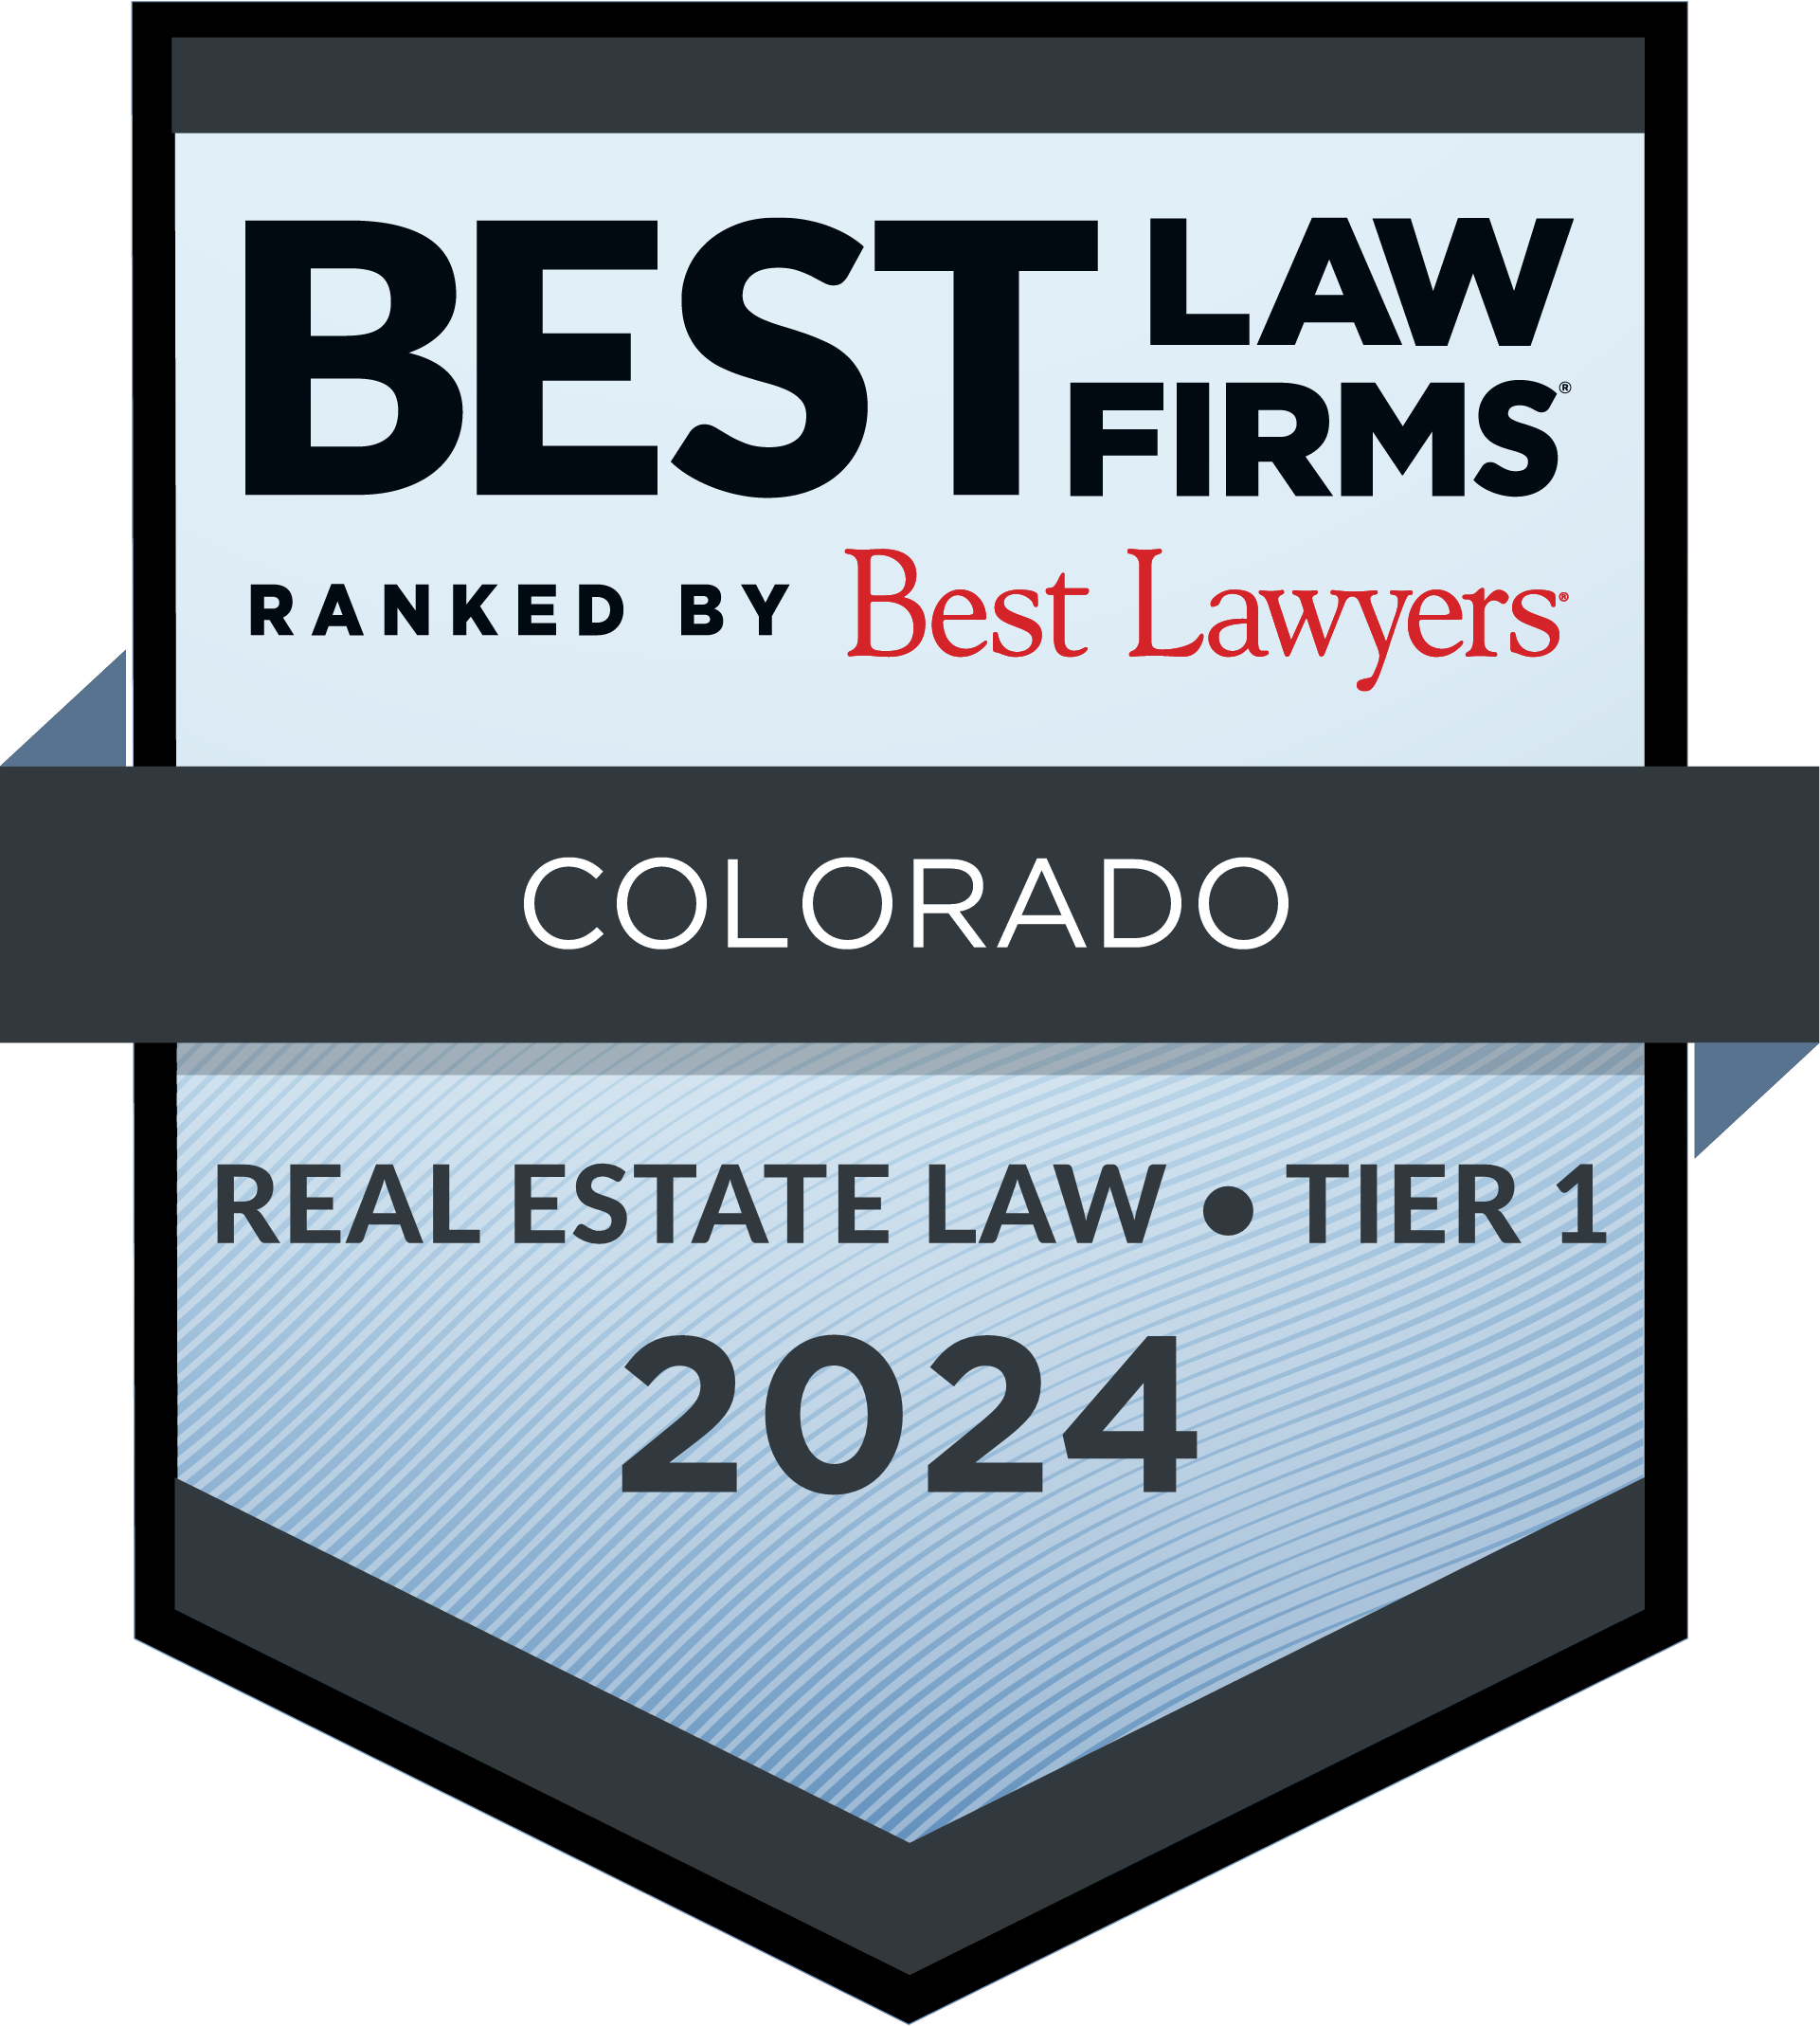 Best Lawyers | Best Law Firms | Rankend By Best Lawyers Colorado Real Estate Law Tirer 1 2024